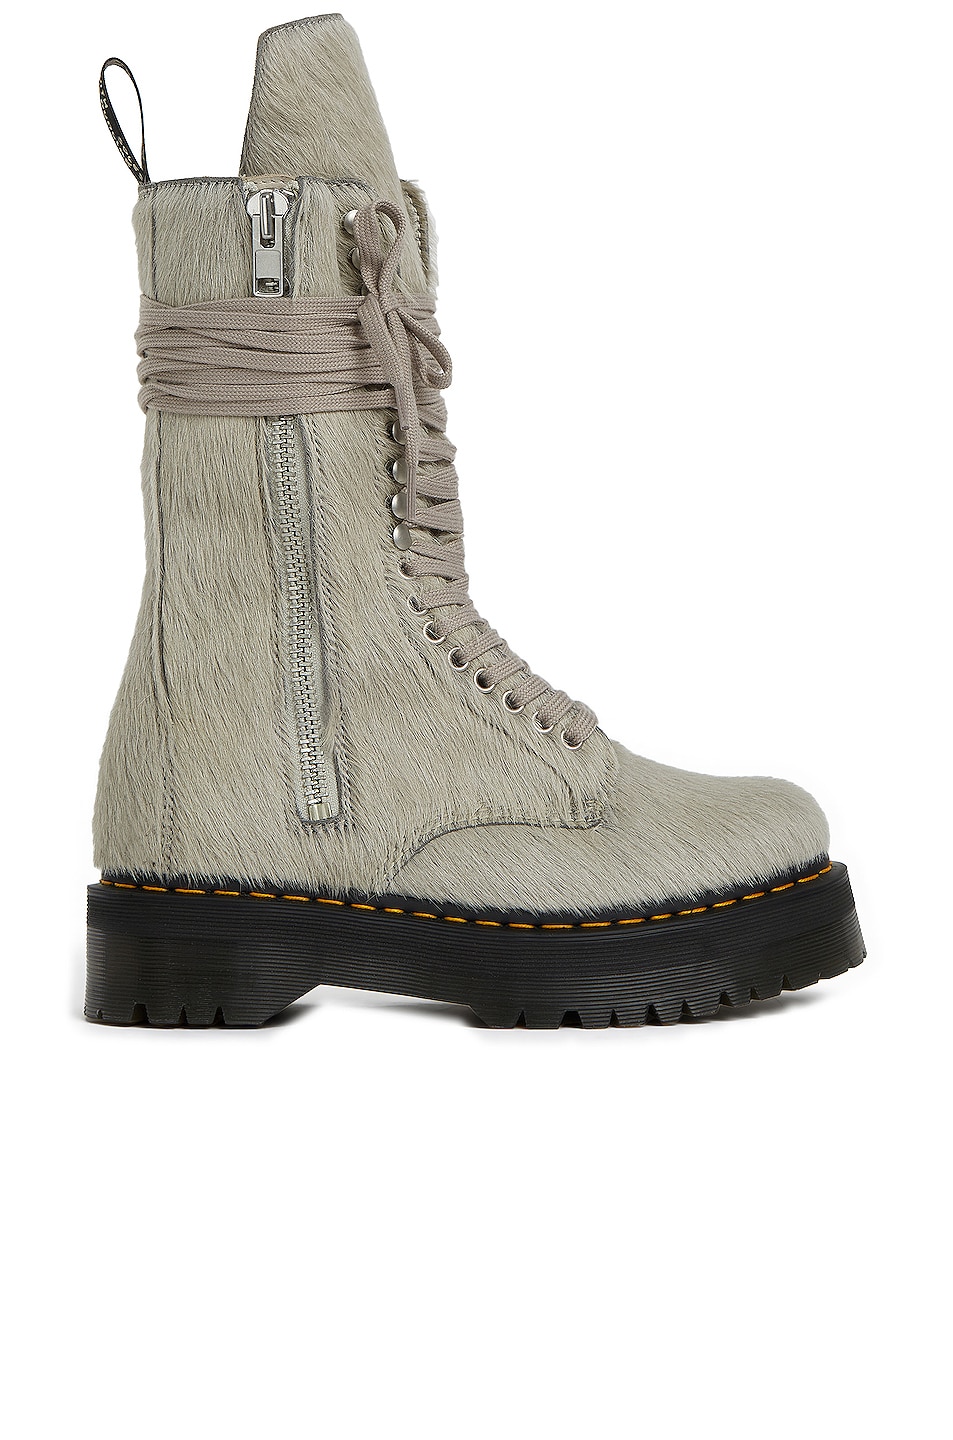 Image 1 of Rick Owens X Dr Martens Quad Sole Calf Length Boot in Pearl